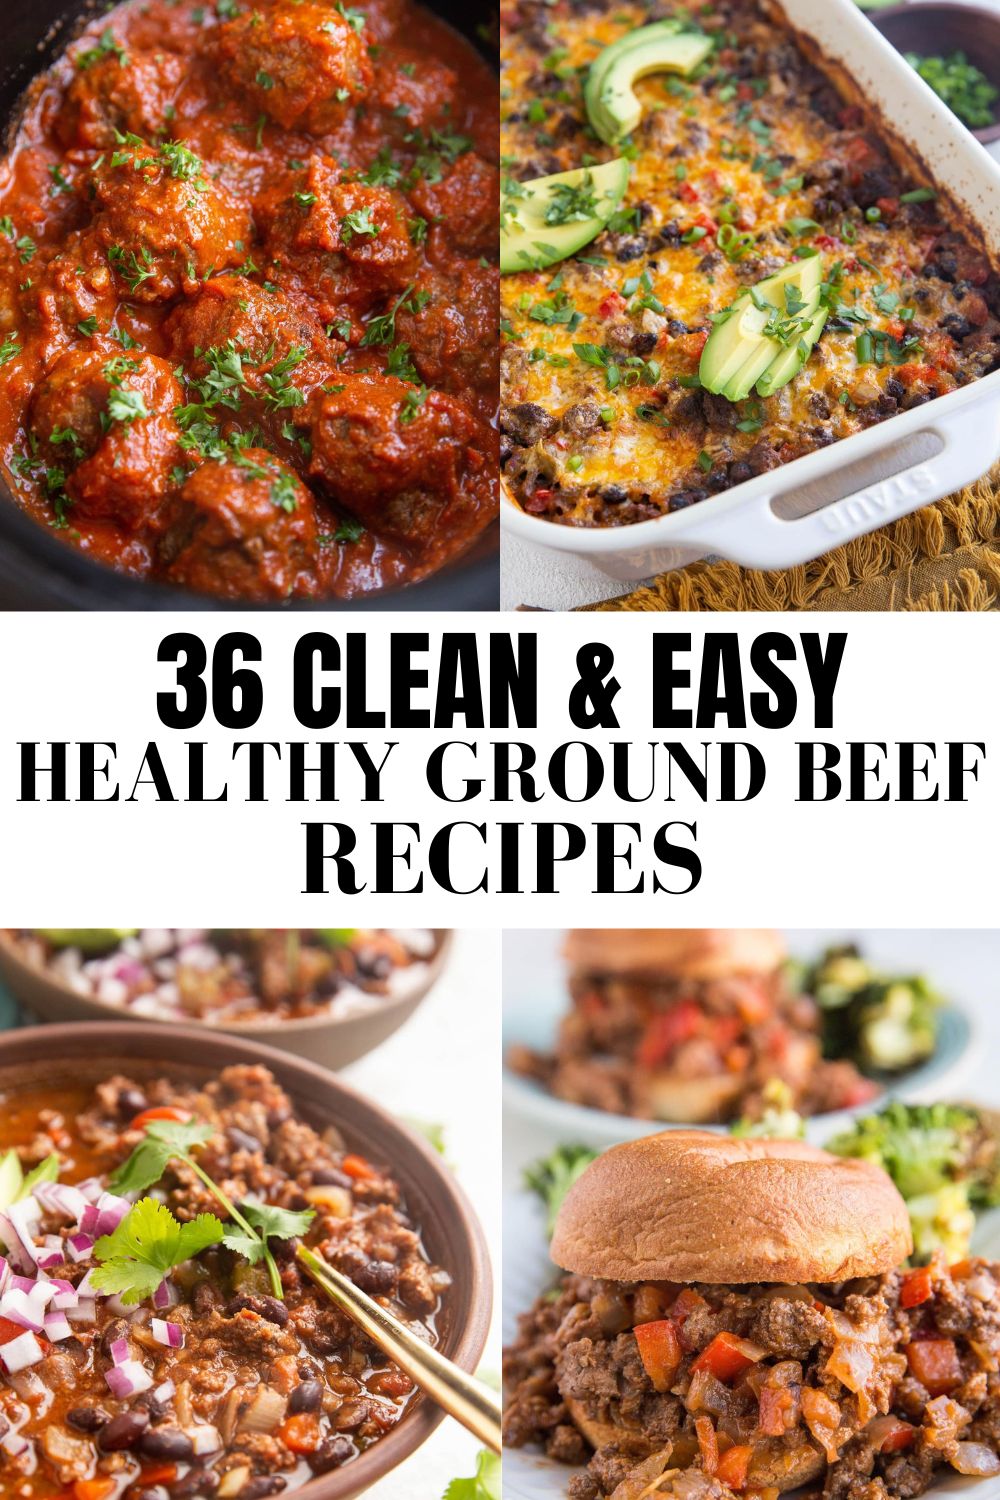 https://www.theroastedroot.net/wp-content/uploads/2023/03/healthy-ground-beef-recipes.jpg